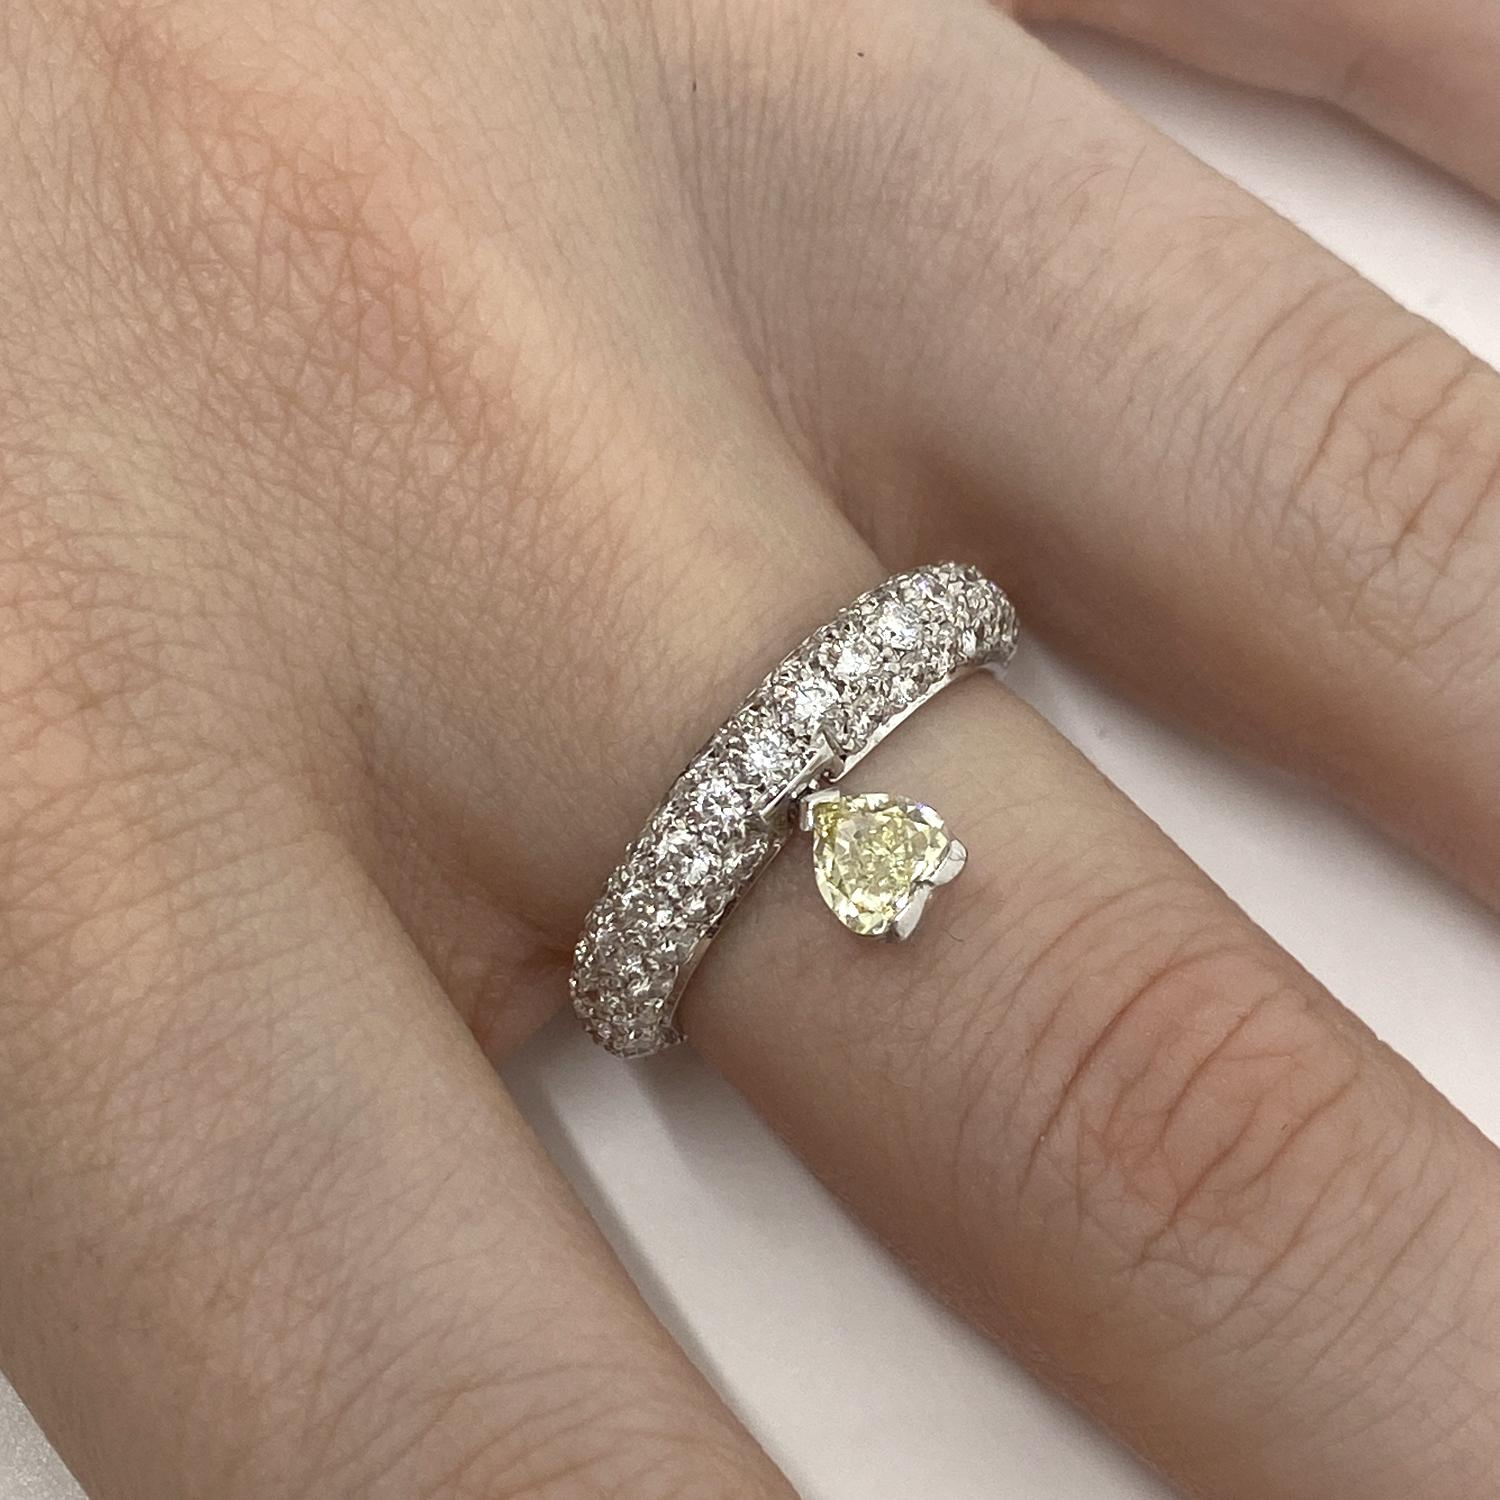 Ring made of 18kt white gold with fancy yellow heart-cut diamond for ct .0.50 and natural white brilliant-cut diamond pave for ct.1.87

Welcome to our jewelry collection, where every piece tells a story of timeless elegance and unparalleled